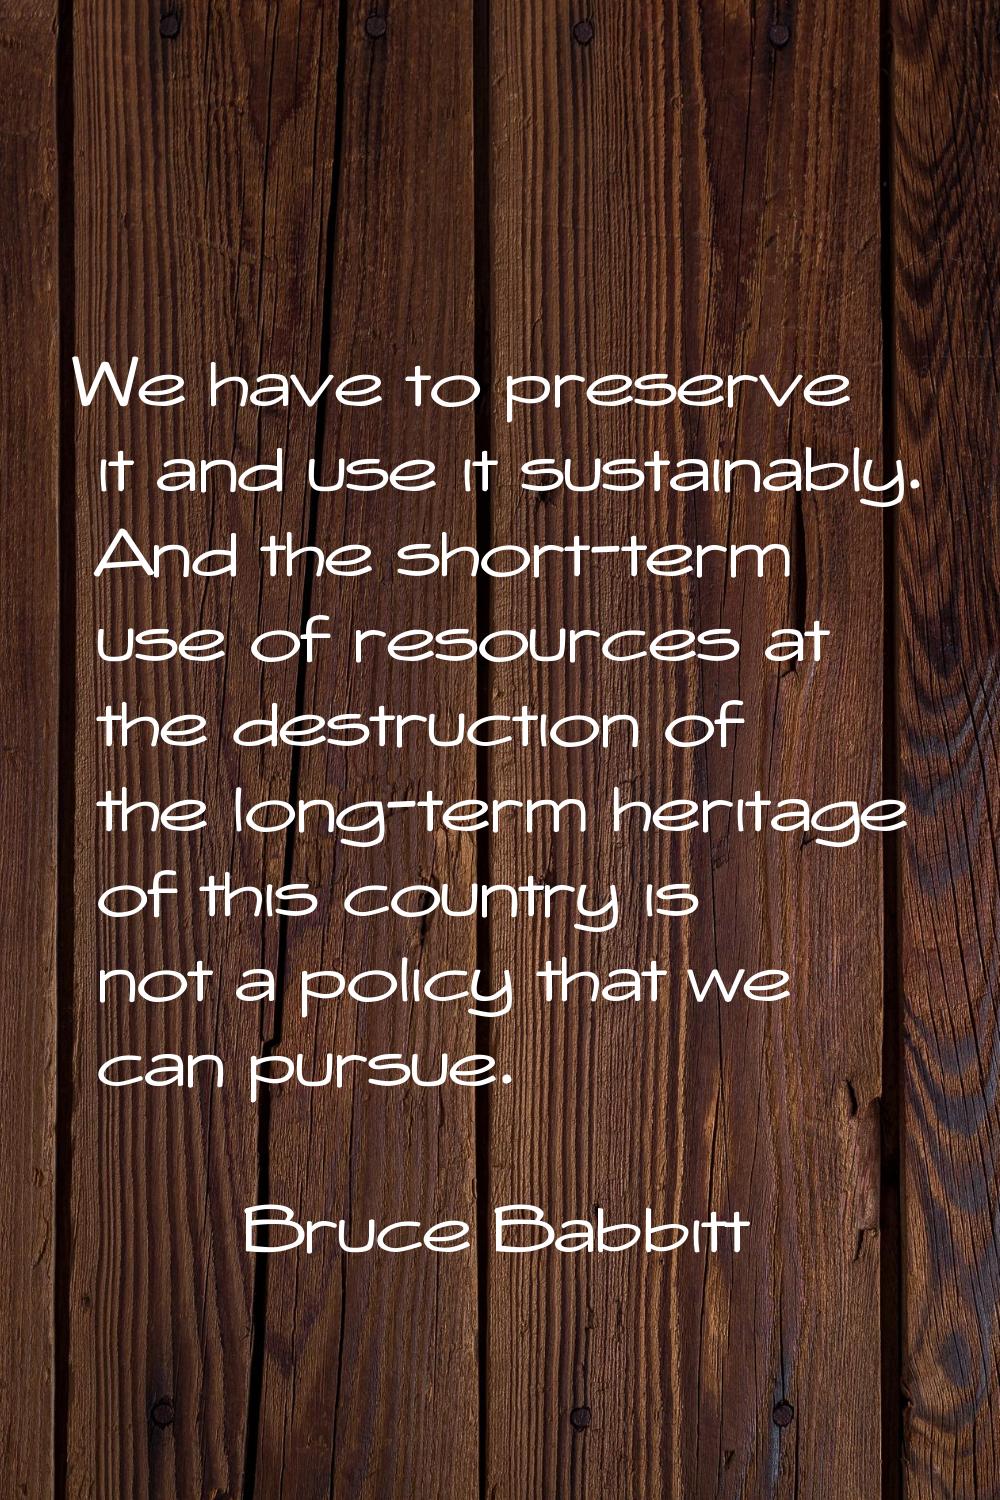 We have to preserve it and use it sustainably. And the short-term use of resources at the destructi